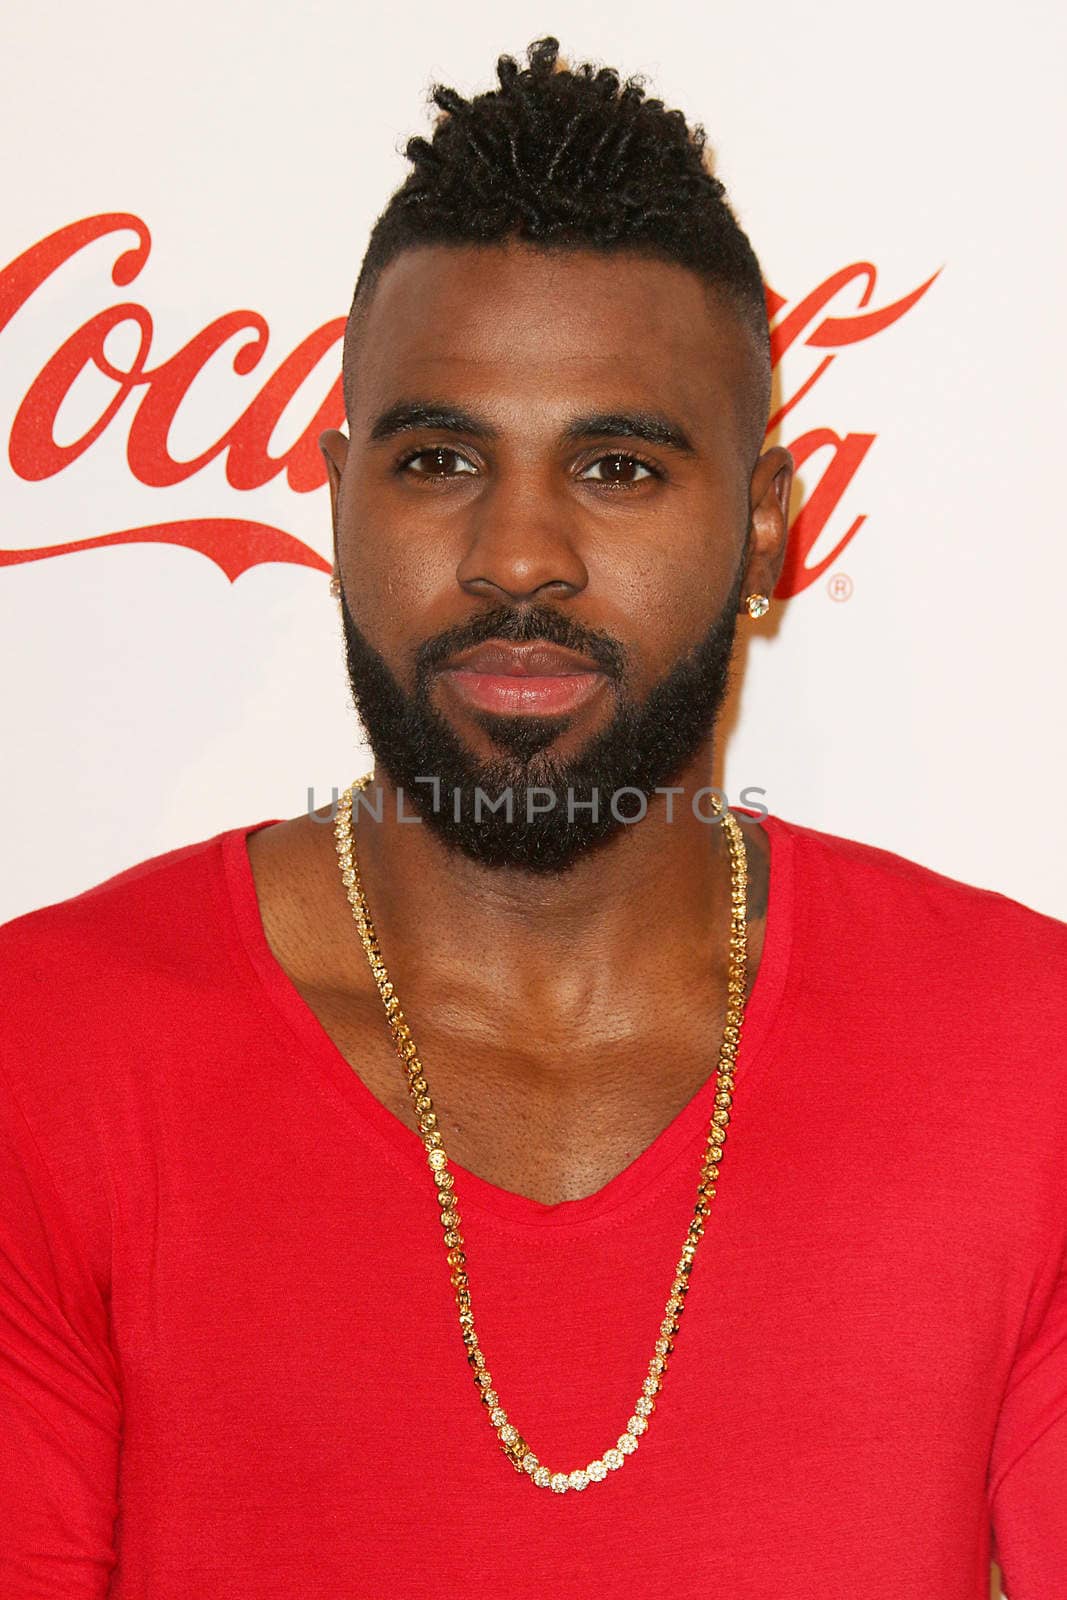 UNITED KINGDOM, London: Jason arrives to the O2 stadium ahead of Capital's Jingle Bell Ball on December 5, 2015.  The event shares a portion of the ticket sales profit with Global's Make Some Noise charity.  Stars in the photos include: David Guetta, F leur East, Jason Derulo,  Katy B, Marvin Humes, Nathan Sykes, Tinie Tempah, WSTRN, and Years and Years.      